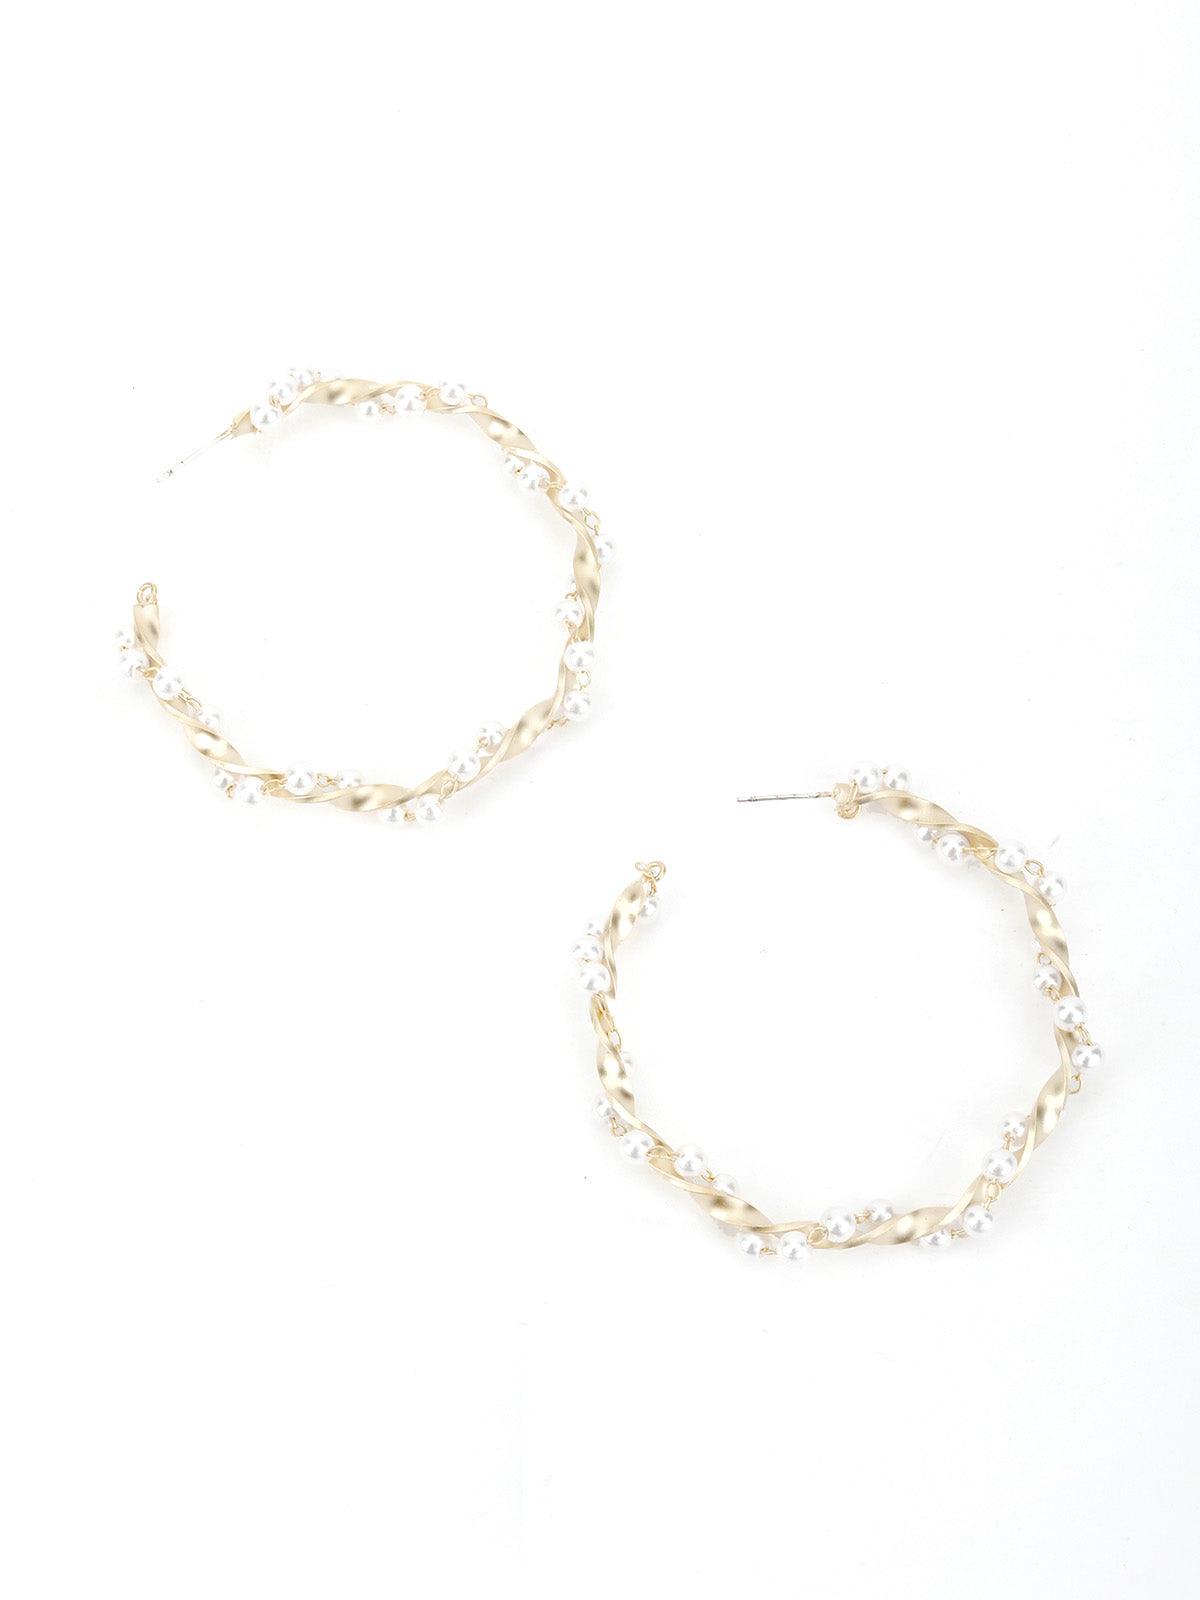 Wavy Gold Tone White Pearl Hoops - Odette